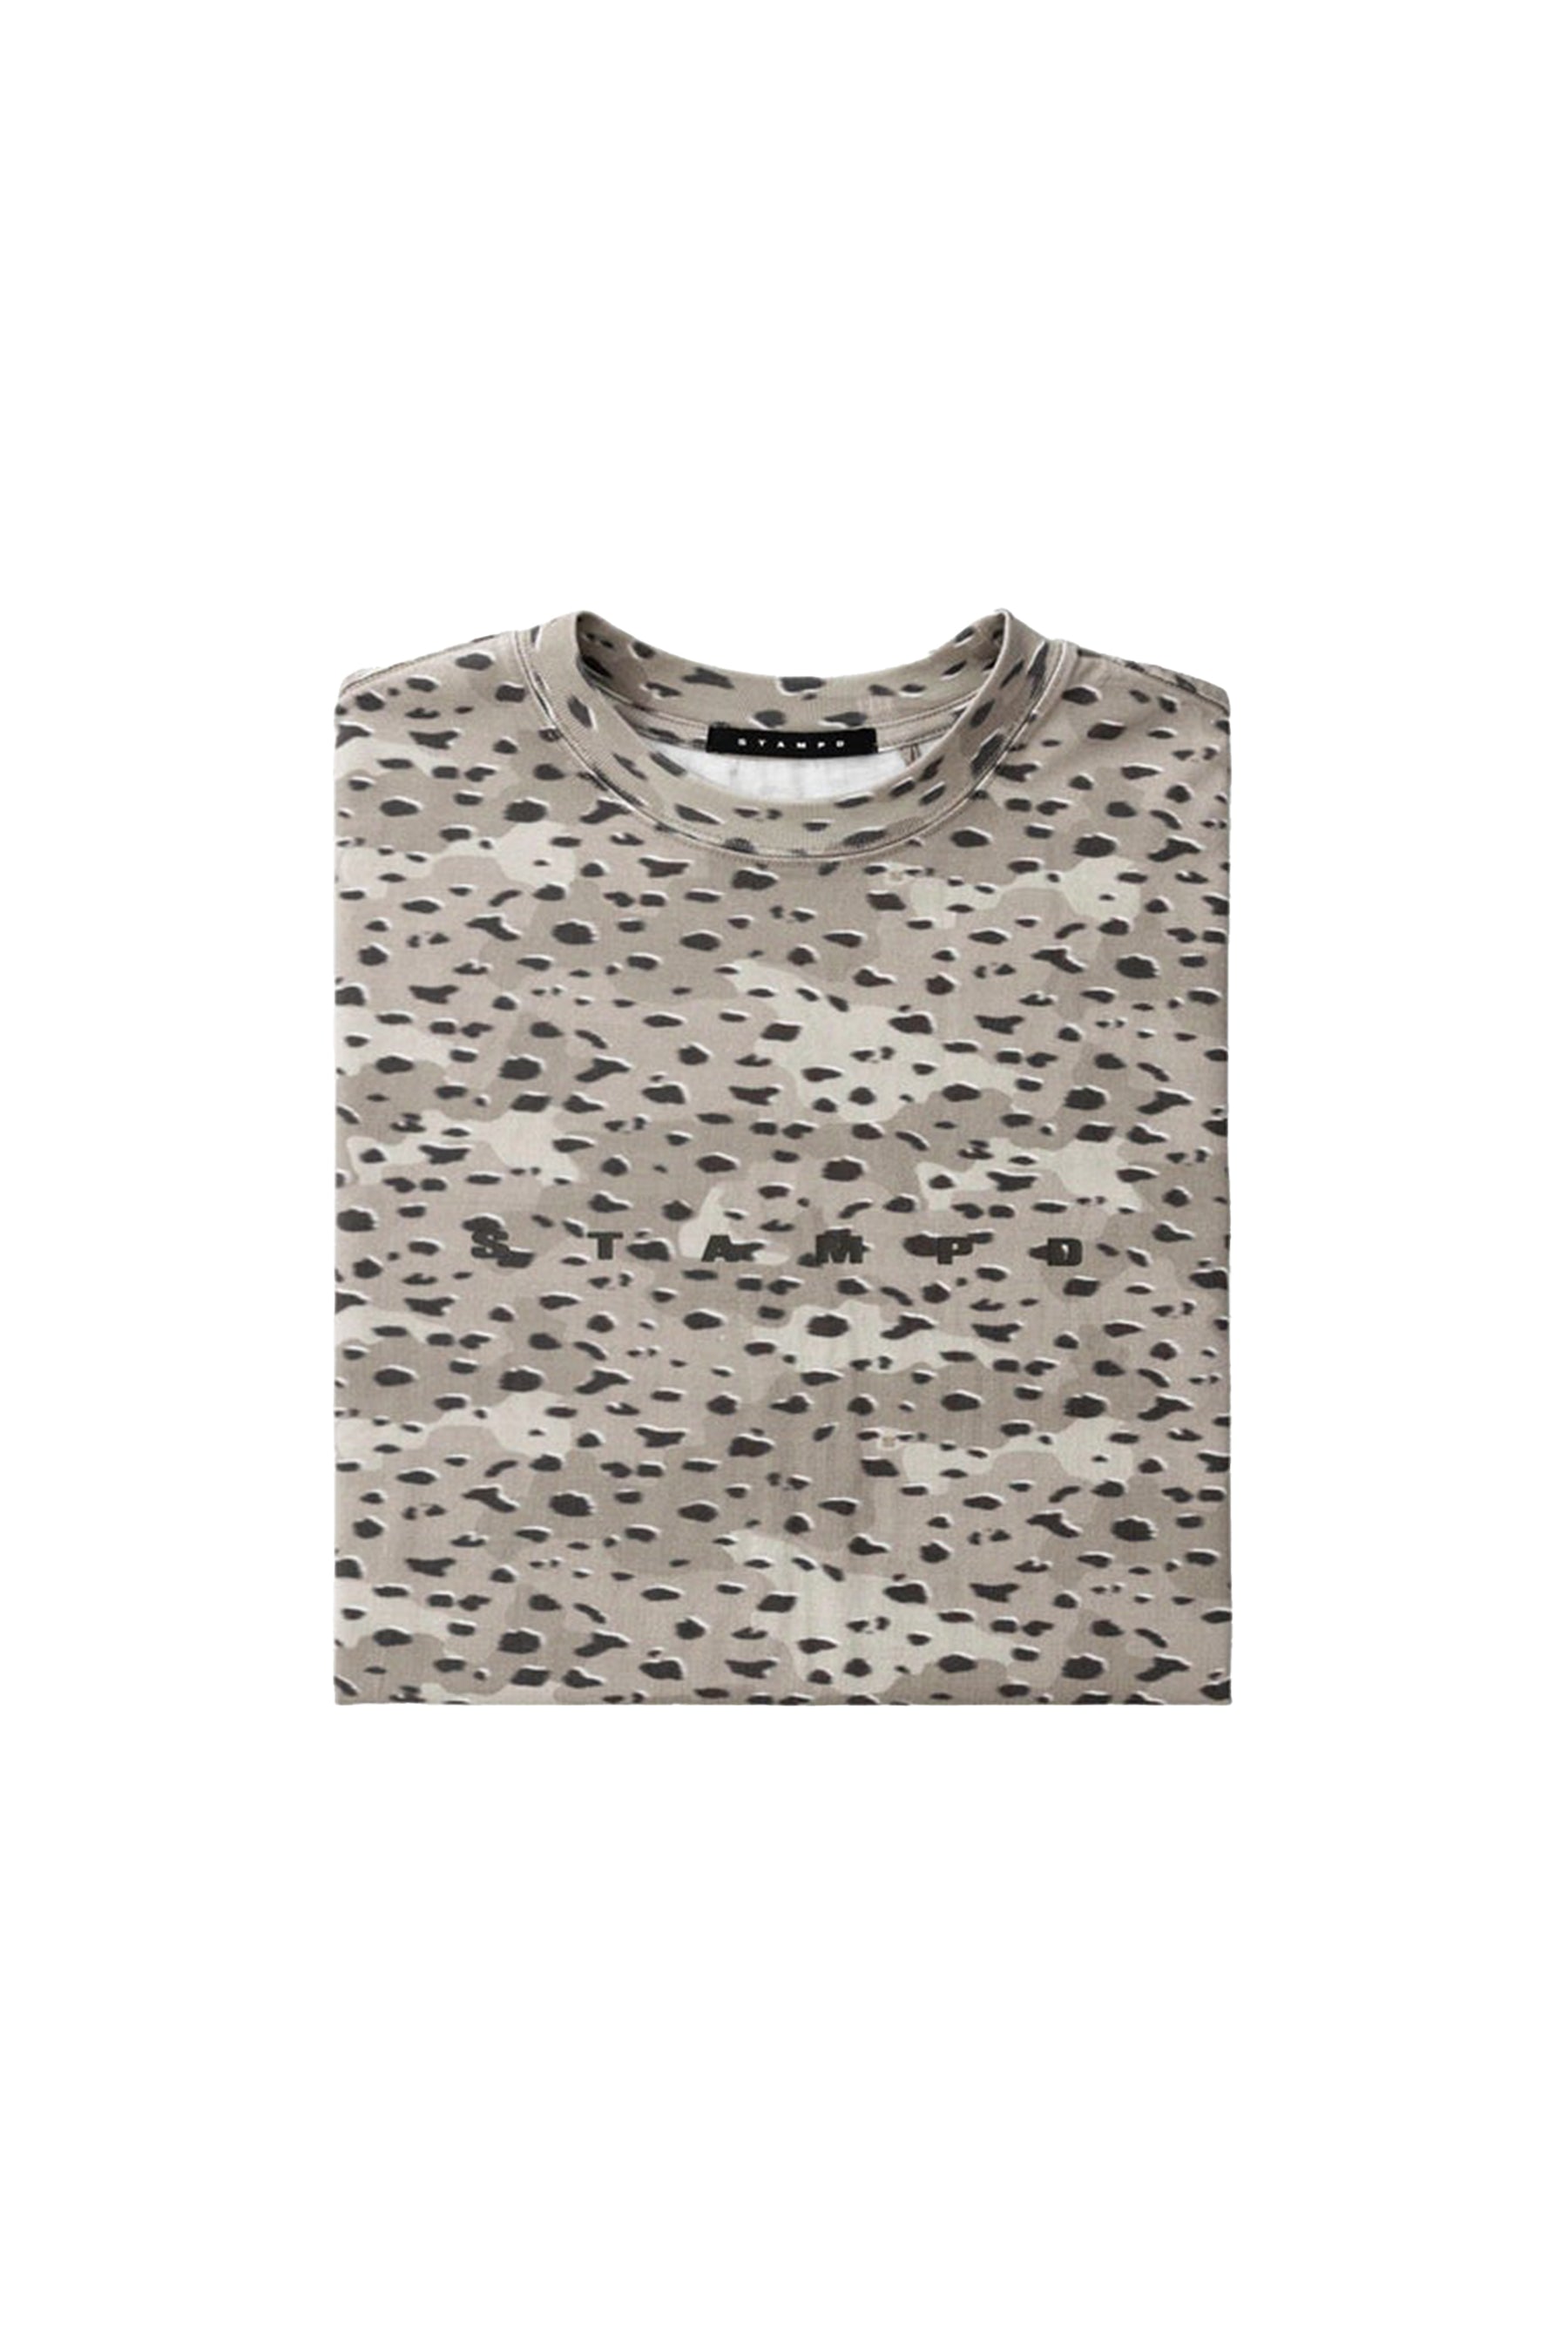 STAMPD CAMO LEOPARD RELAXED TEE / CAMO LEOPARD